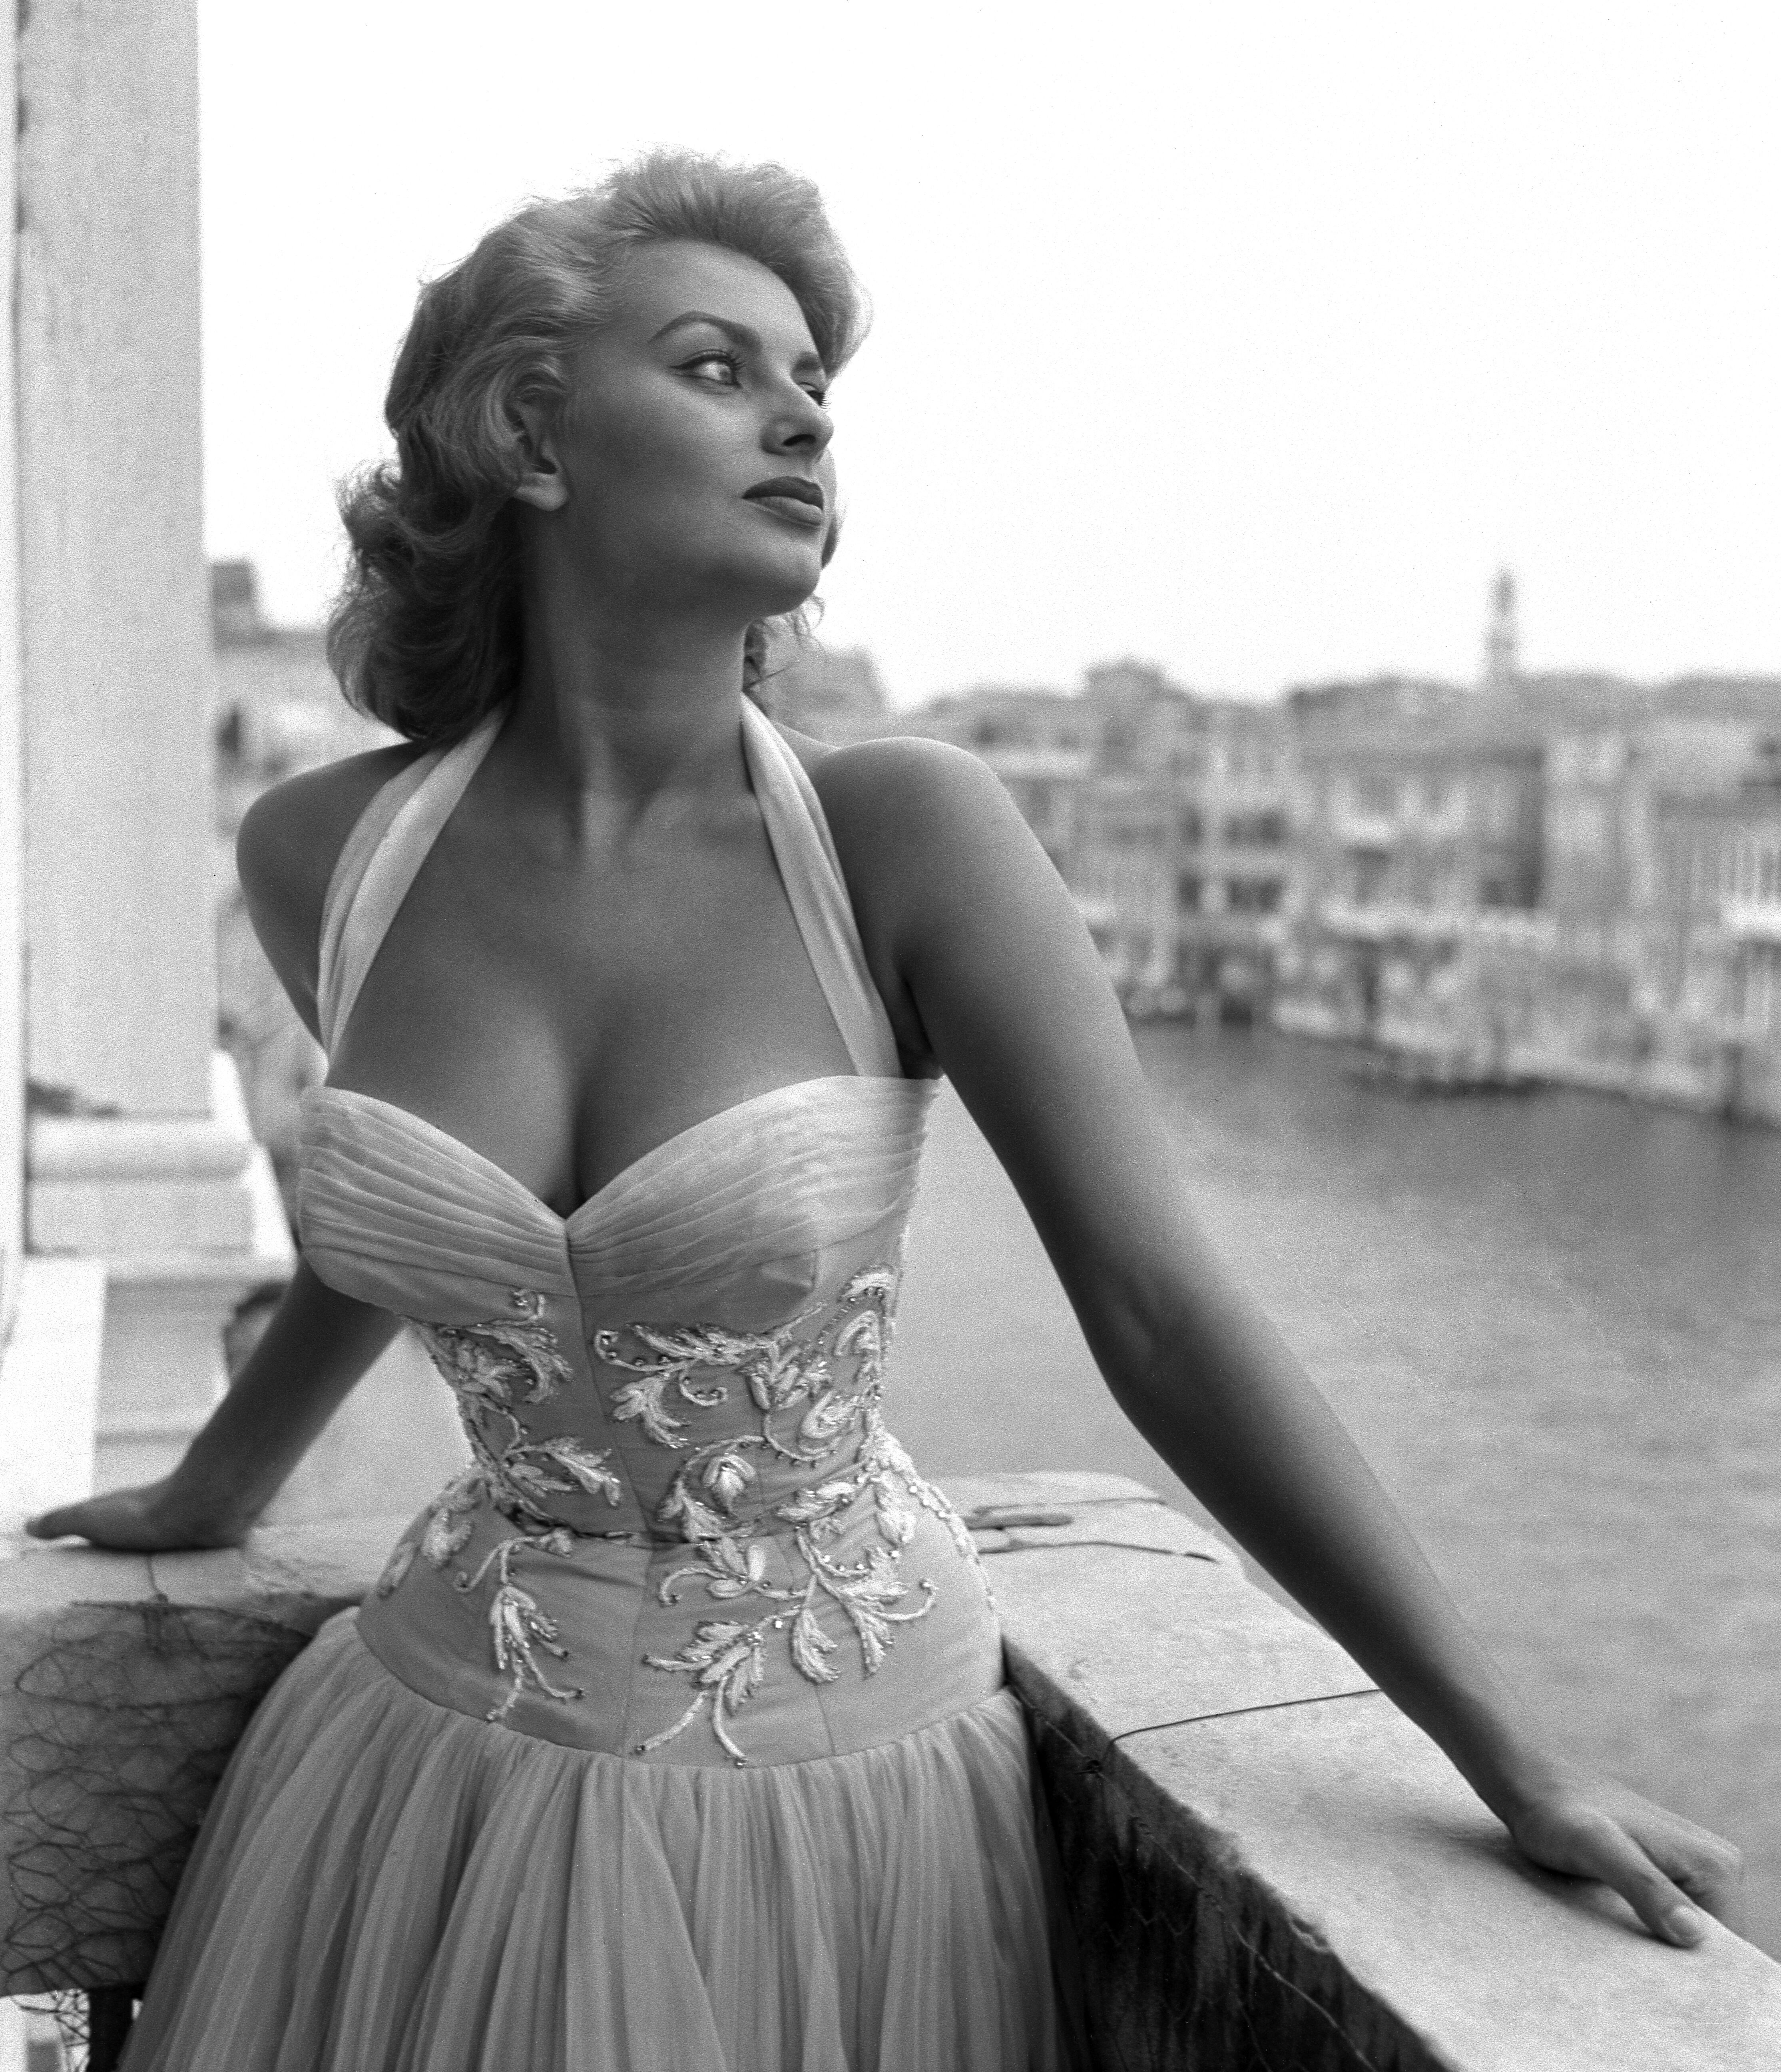  Sophia Loren on a terrace on the Canal Grande in Venice, 1955 | Photo: Getty Images